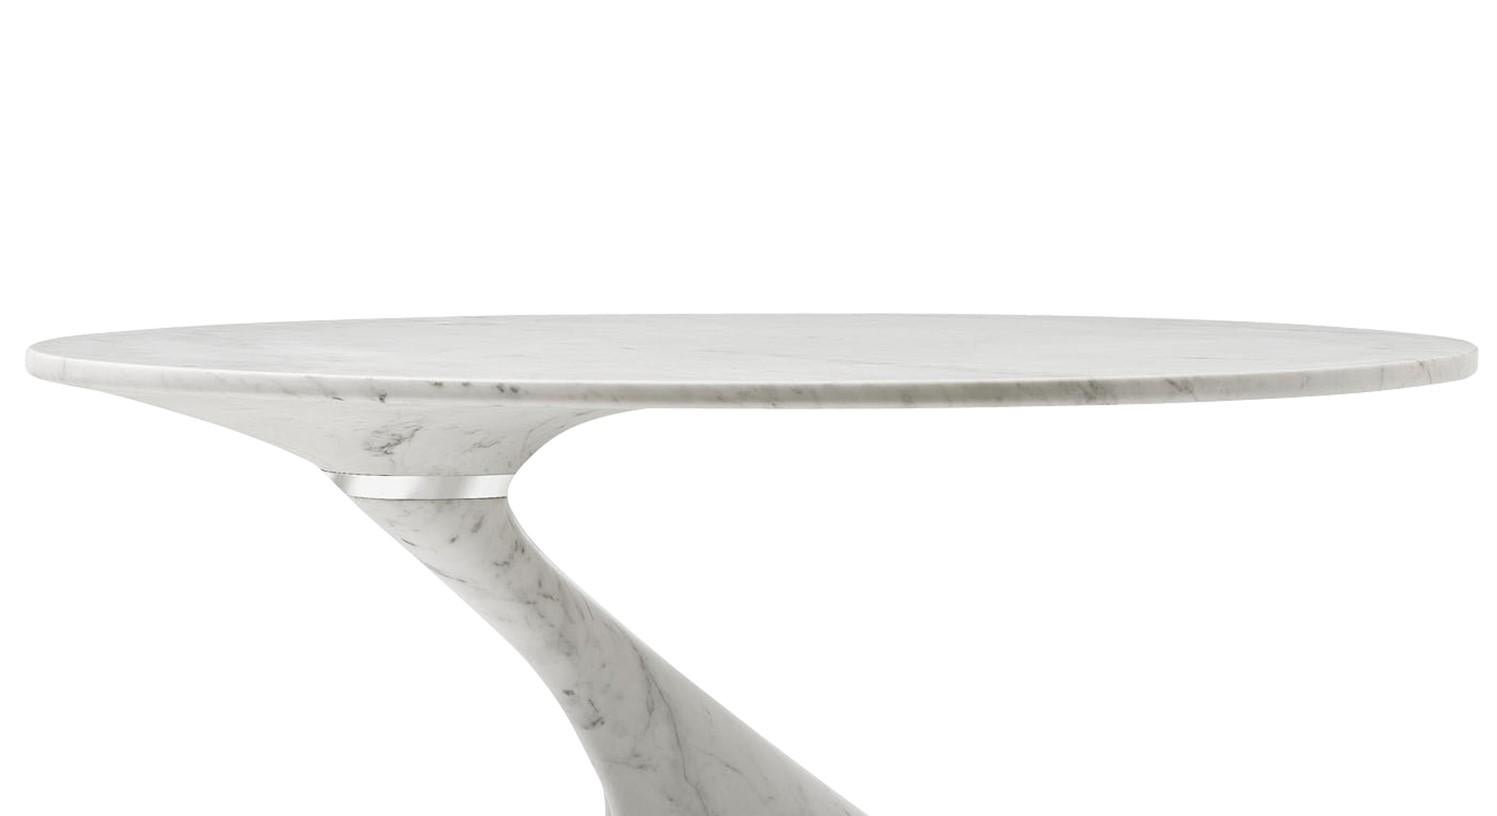 Part of a trio designed by Giuseppe Chigiotti and named Swan, after the elegant silhouette evoking the shape of the bird's elongated neck, this striking side table can be displayed by itself in a modern interior or along with the other pieces in the